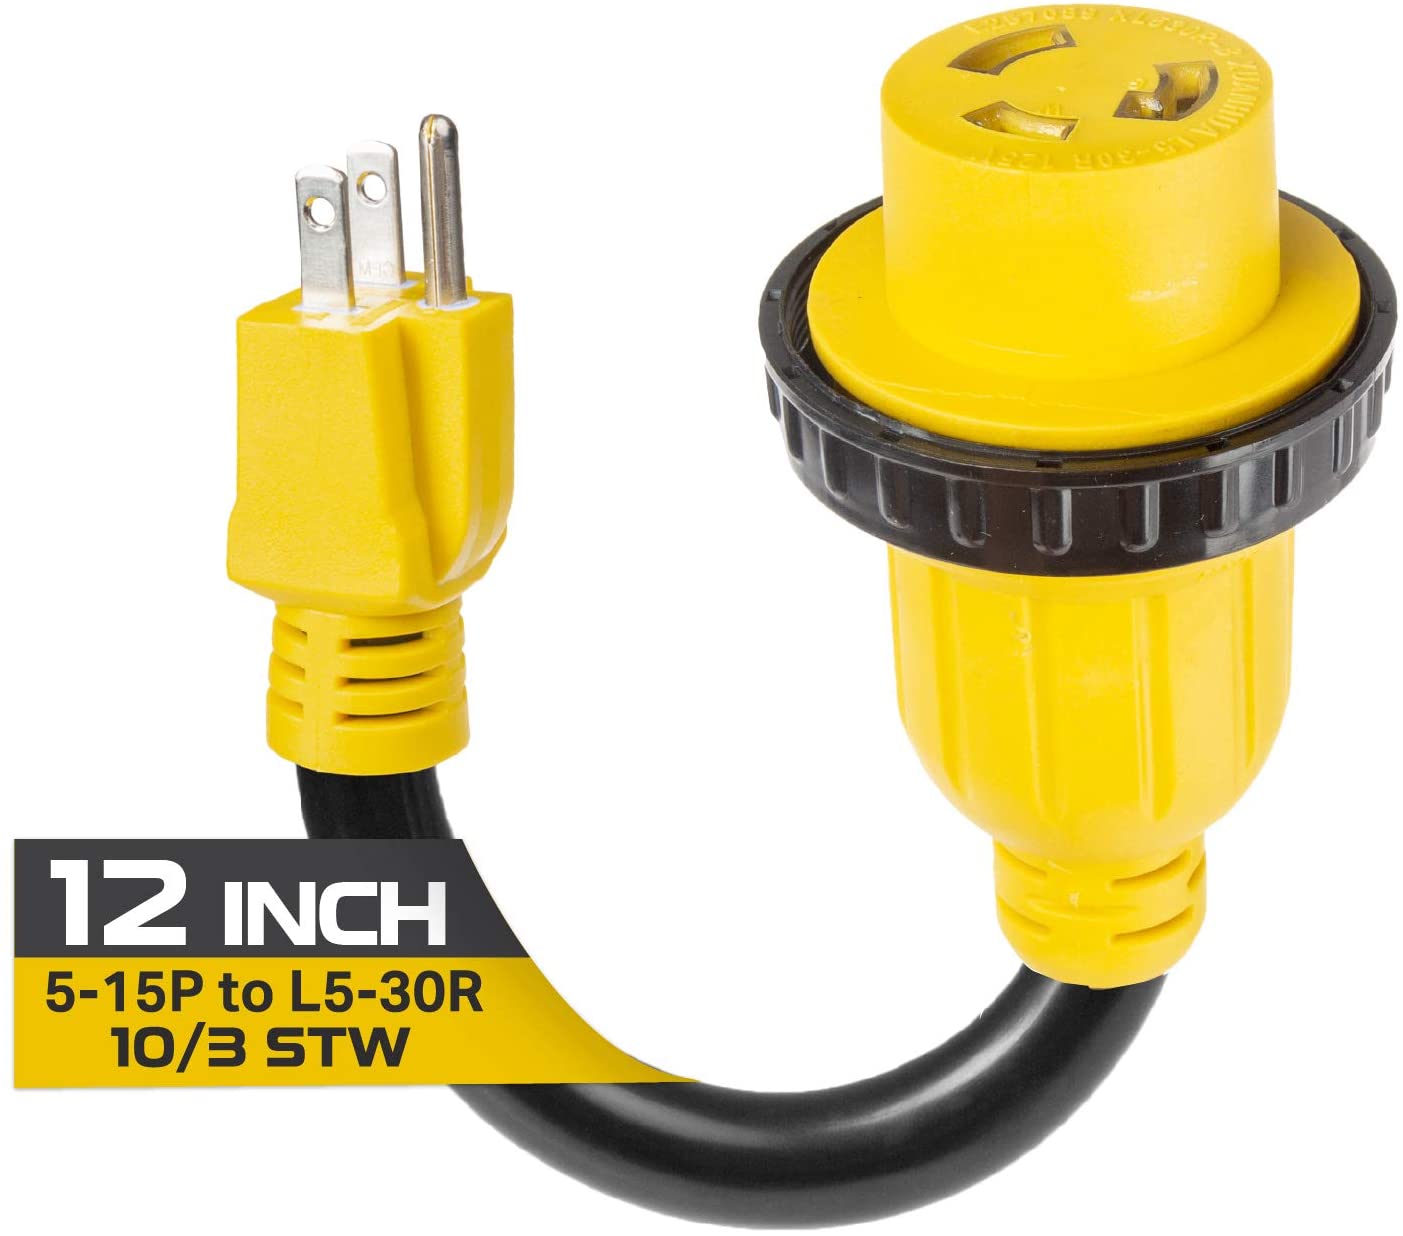 50 Amp to 30 Amp RV Electrical Adapter Power Cord, 12 Inch - 10/3 STW 14-50P Male Plug to TT-30R Female Receptacle, Yellow